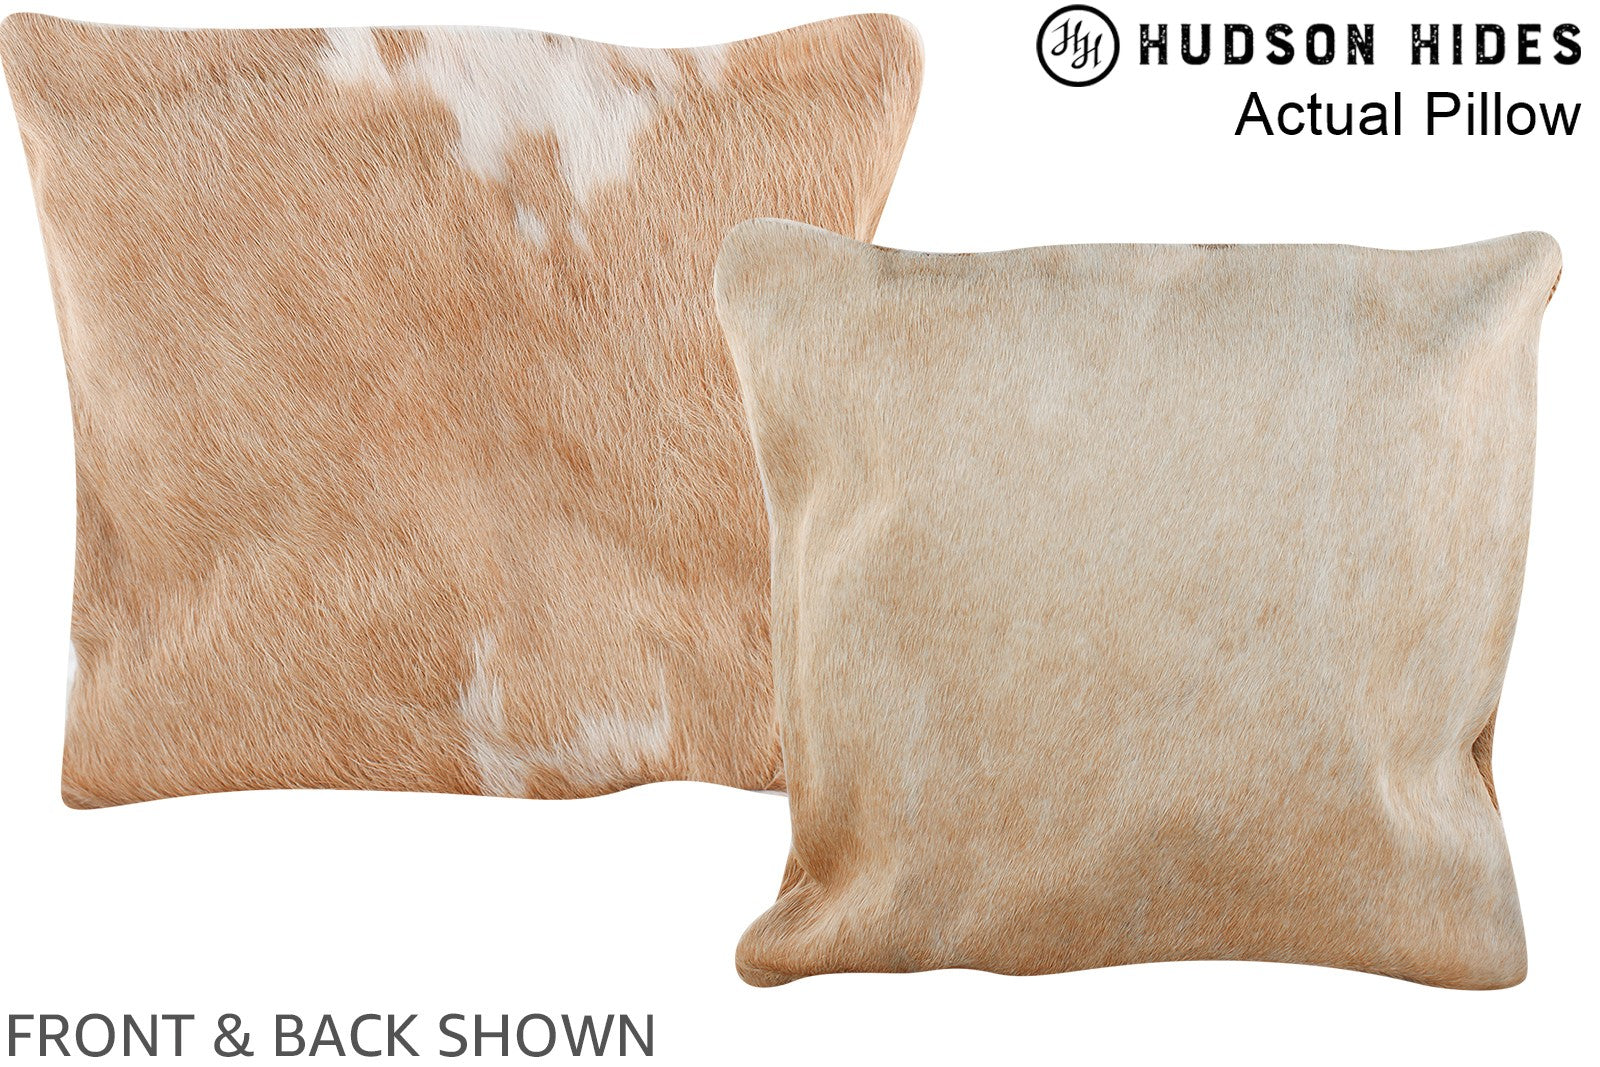 Beige and White Cowhide Pillow #A13754